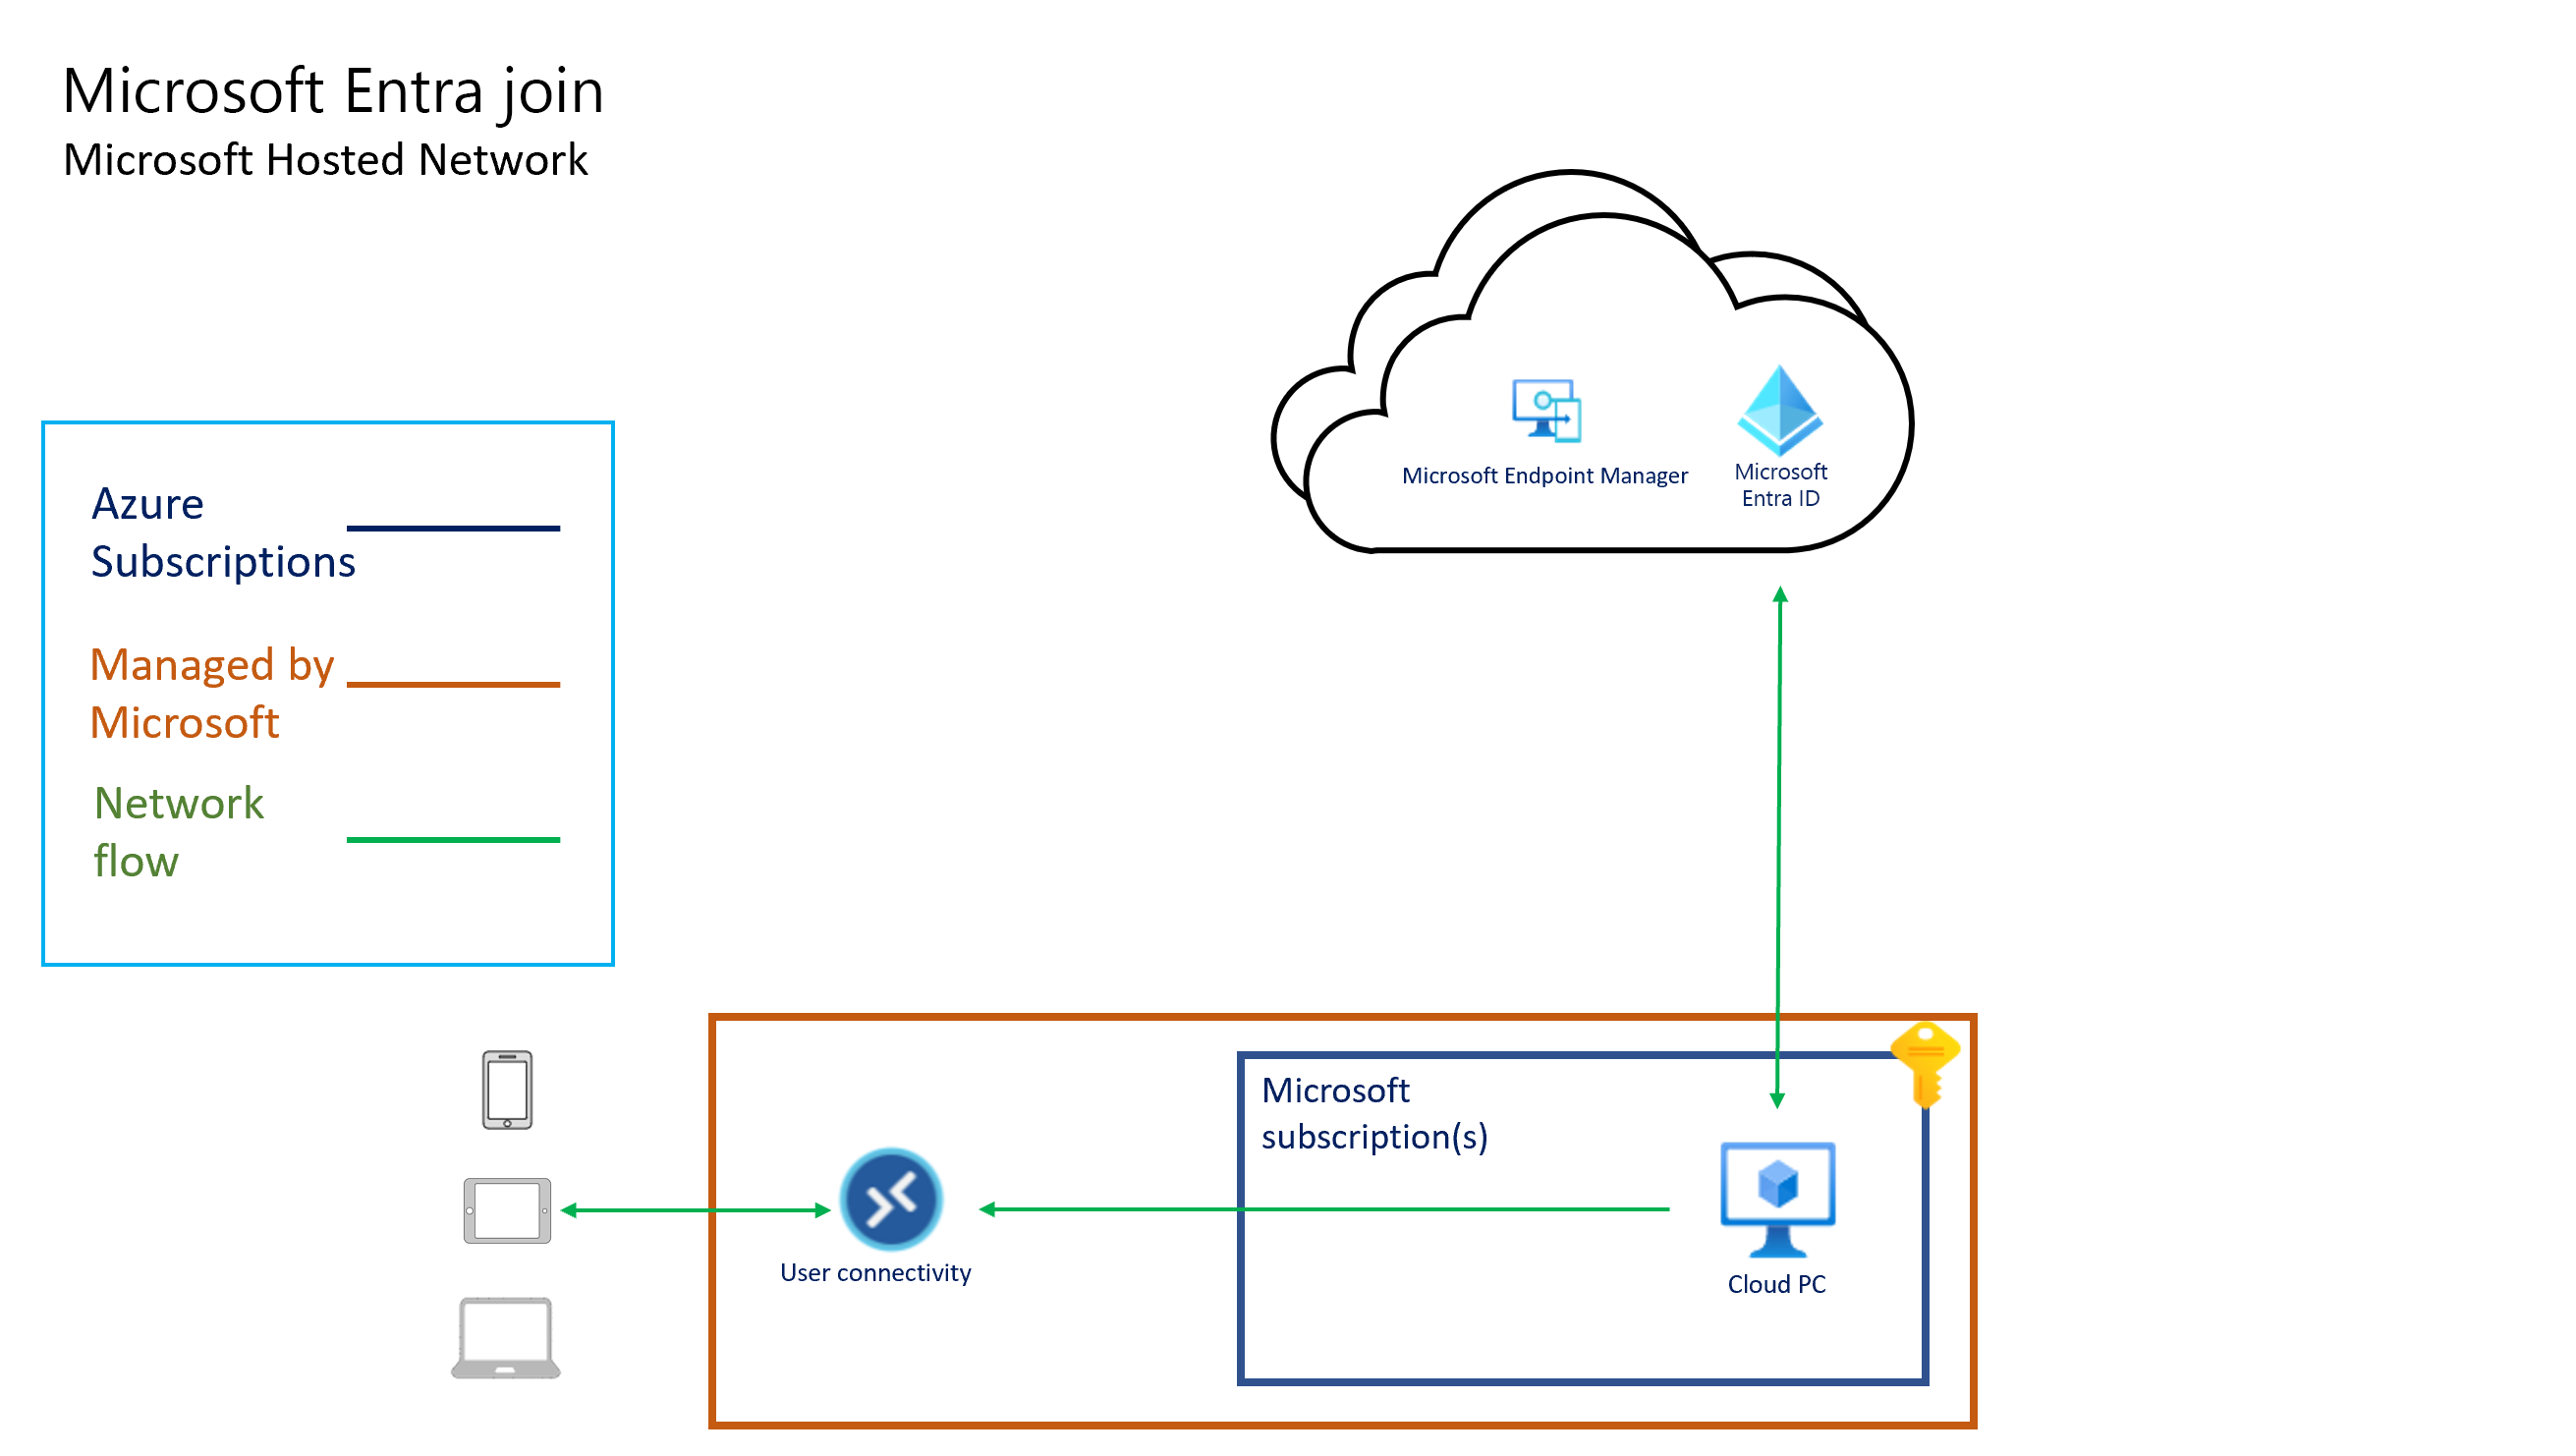 Screenshot of Microsoft Entra join architecture with Microsoft hosted network